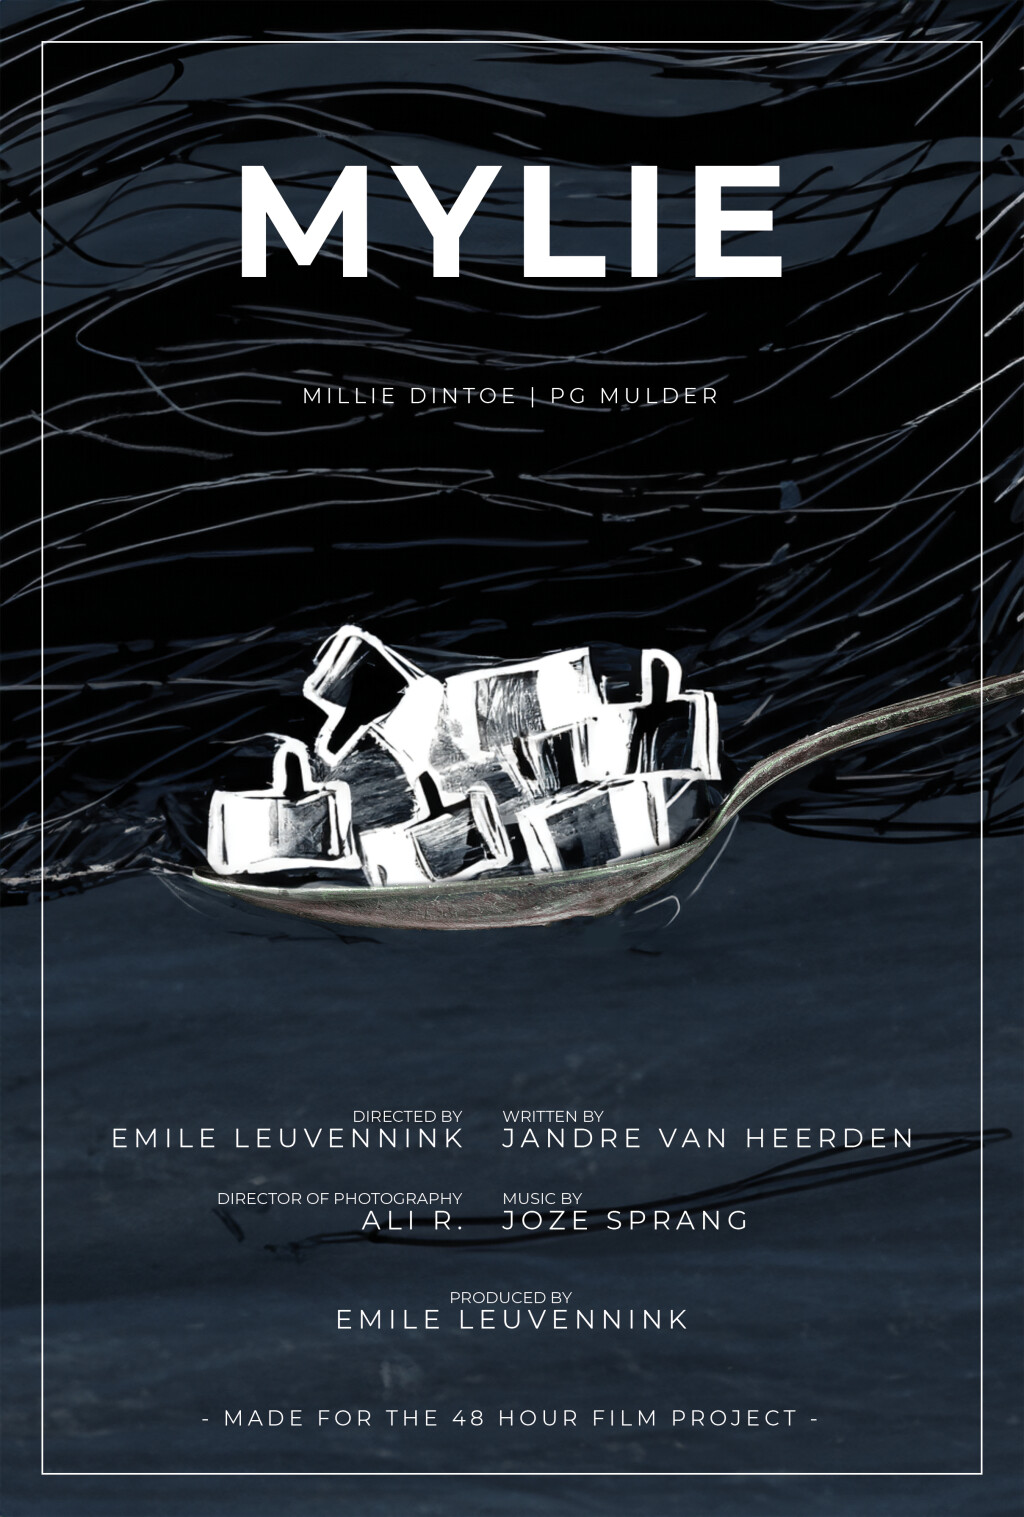 Filmposter for Mylie